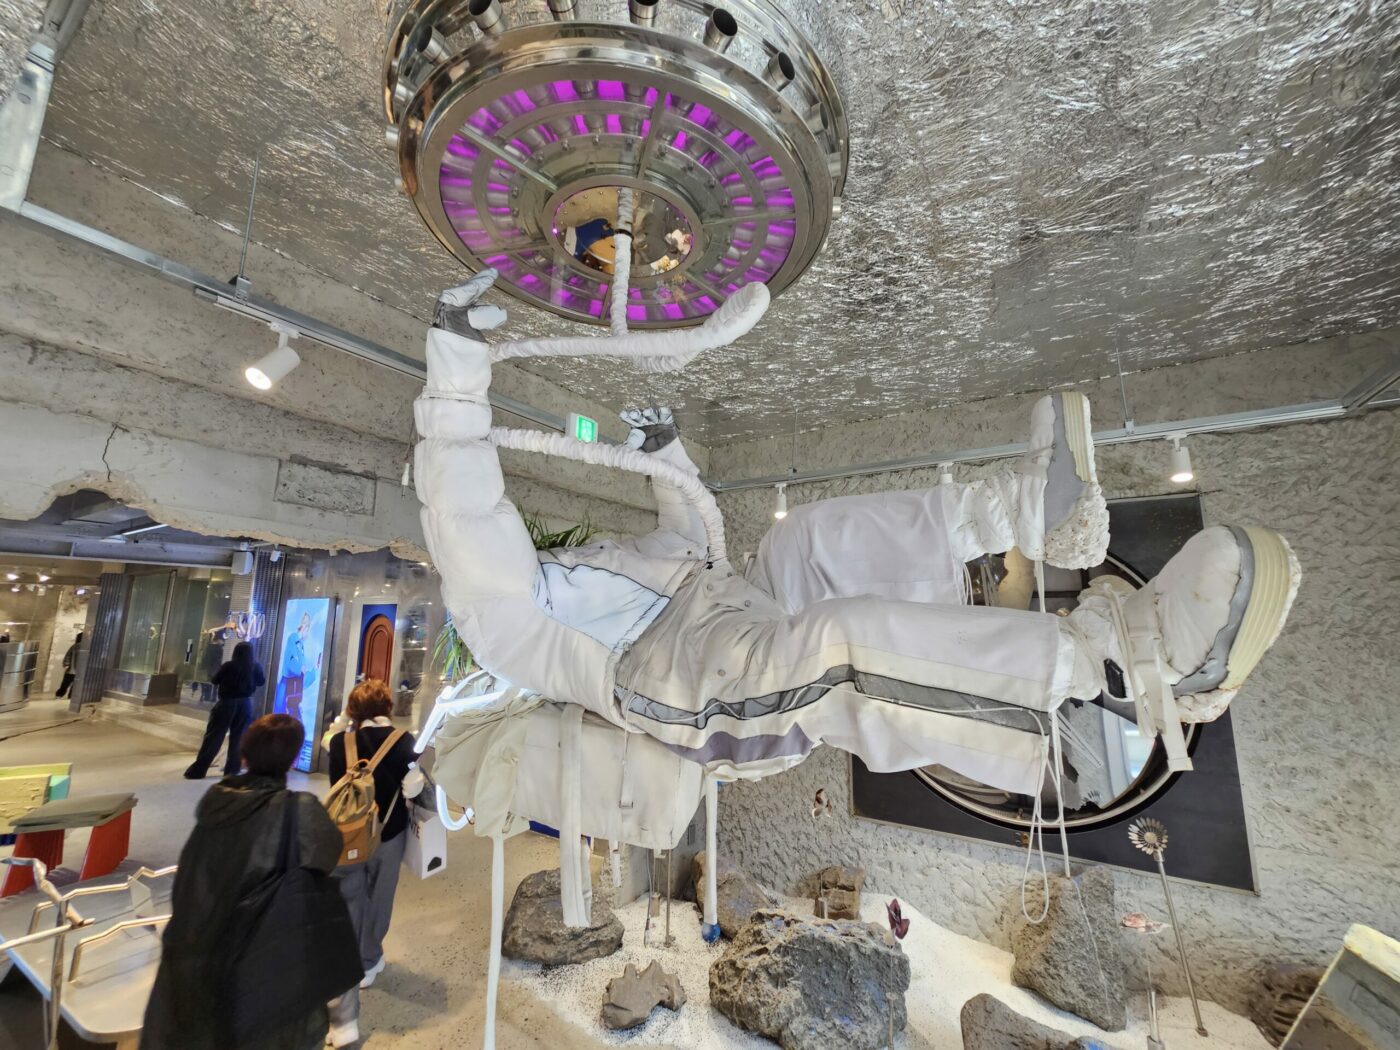 AderErrors PopUp in Seongsu-dong With depictions of astronauts docking in space